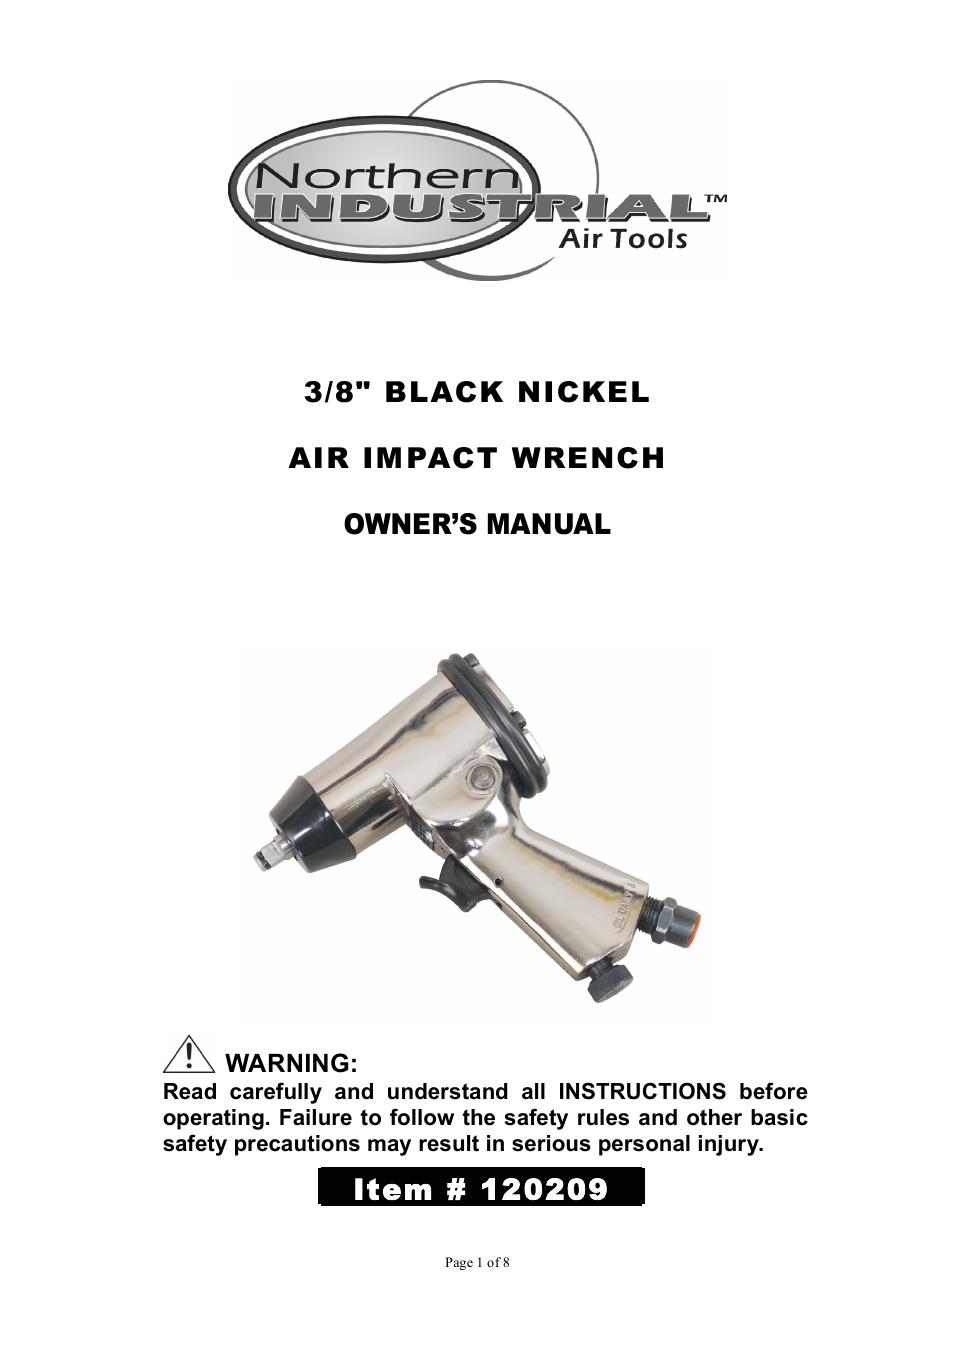 Northern Industrial Tools NORTHERN INDUSTRIAL BLACK NICKEL AIR IMPACT WRENCH User Manual | 8 pages